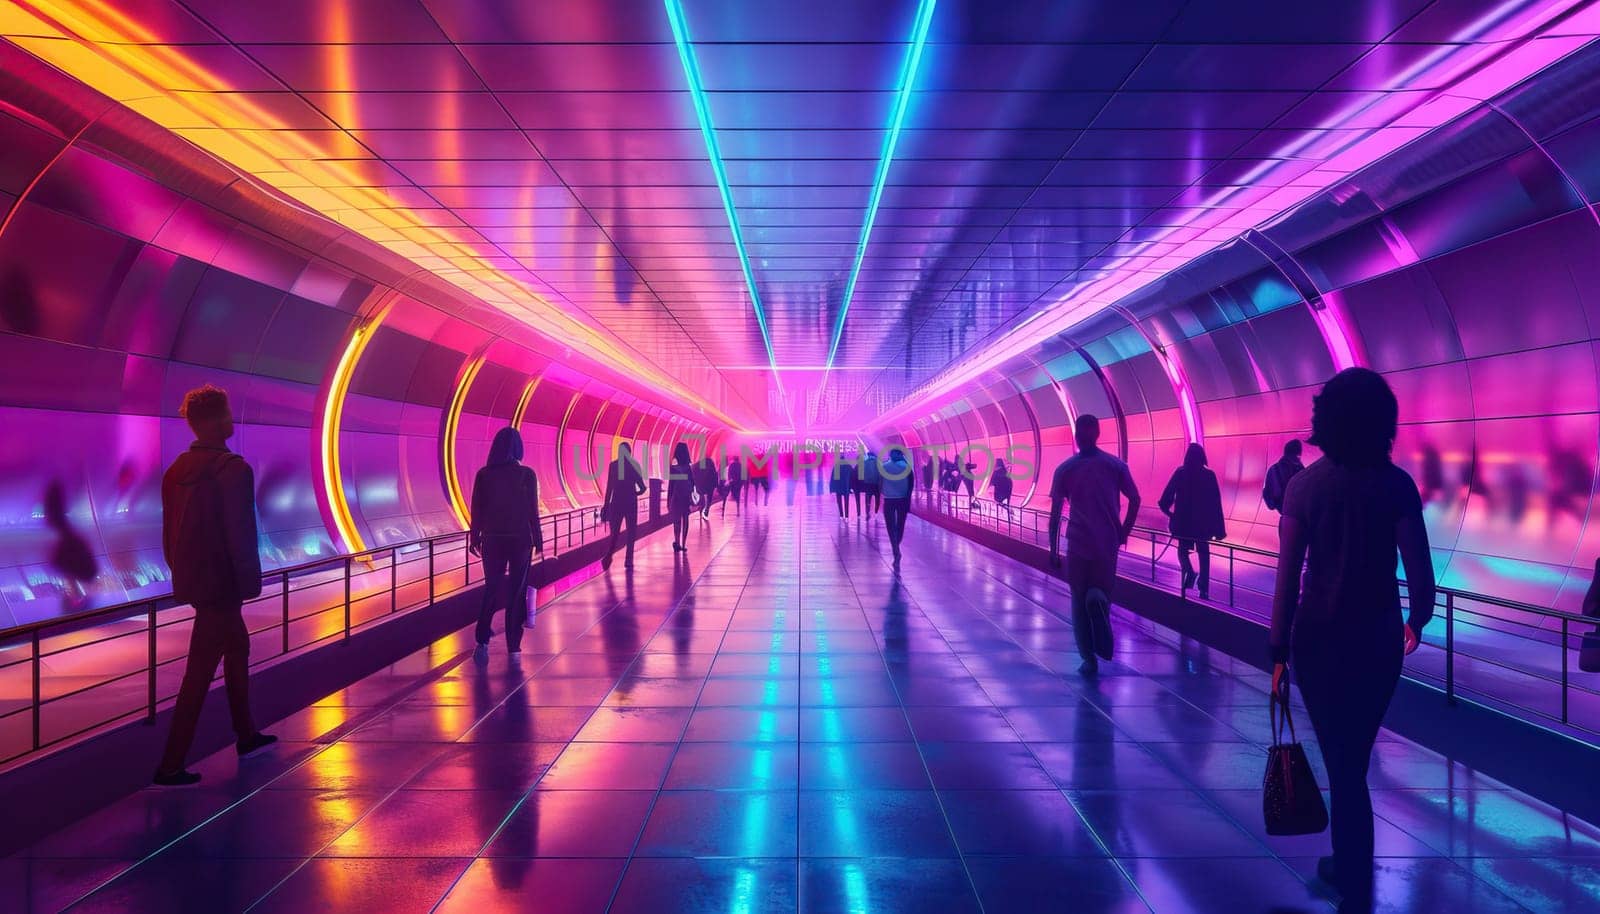 A group of people are walking down a brightly lit subway platform by AI generated image.